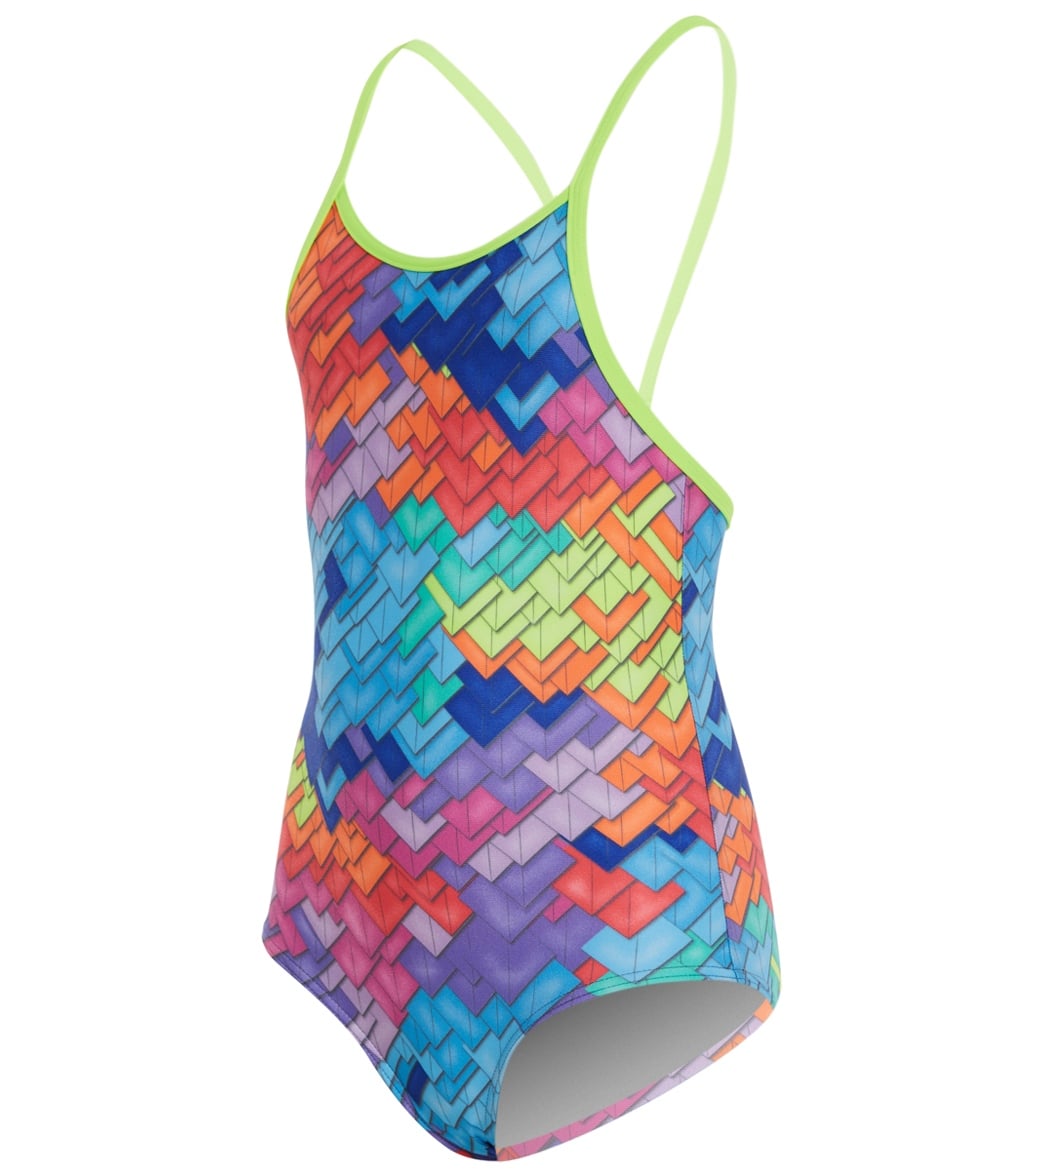 Funkita Toddler Girls Layer Cake One Piece Swimsuit - Multi Pink 1T - Swimoutlet.com